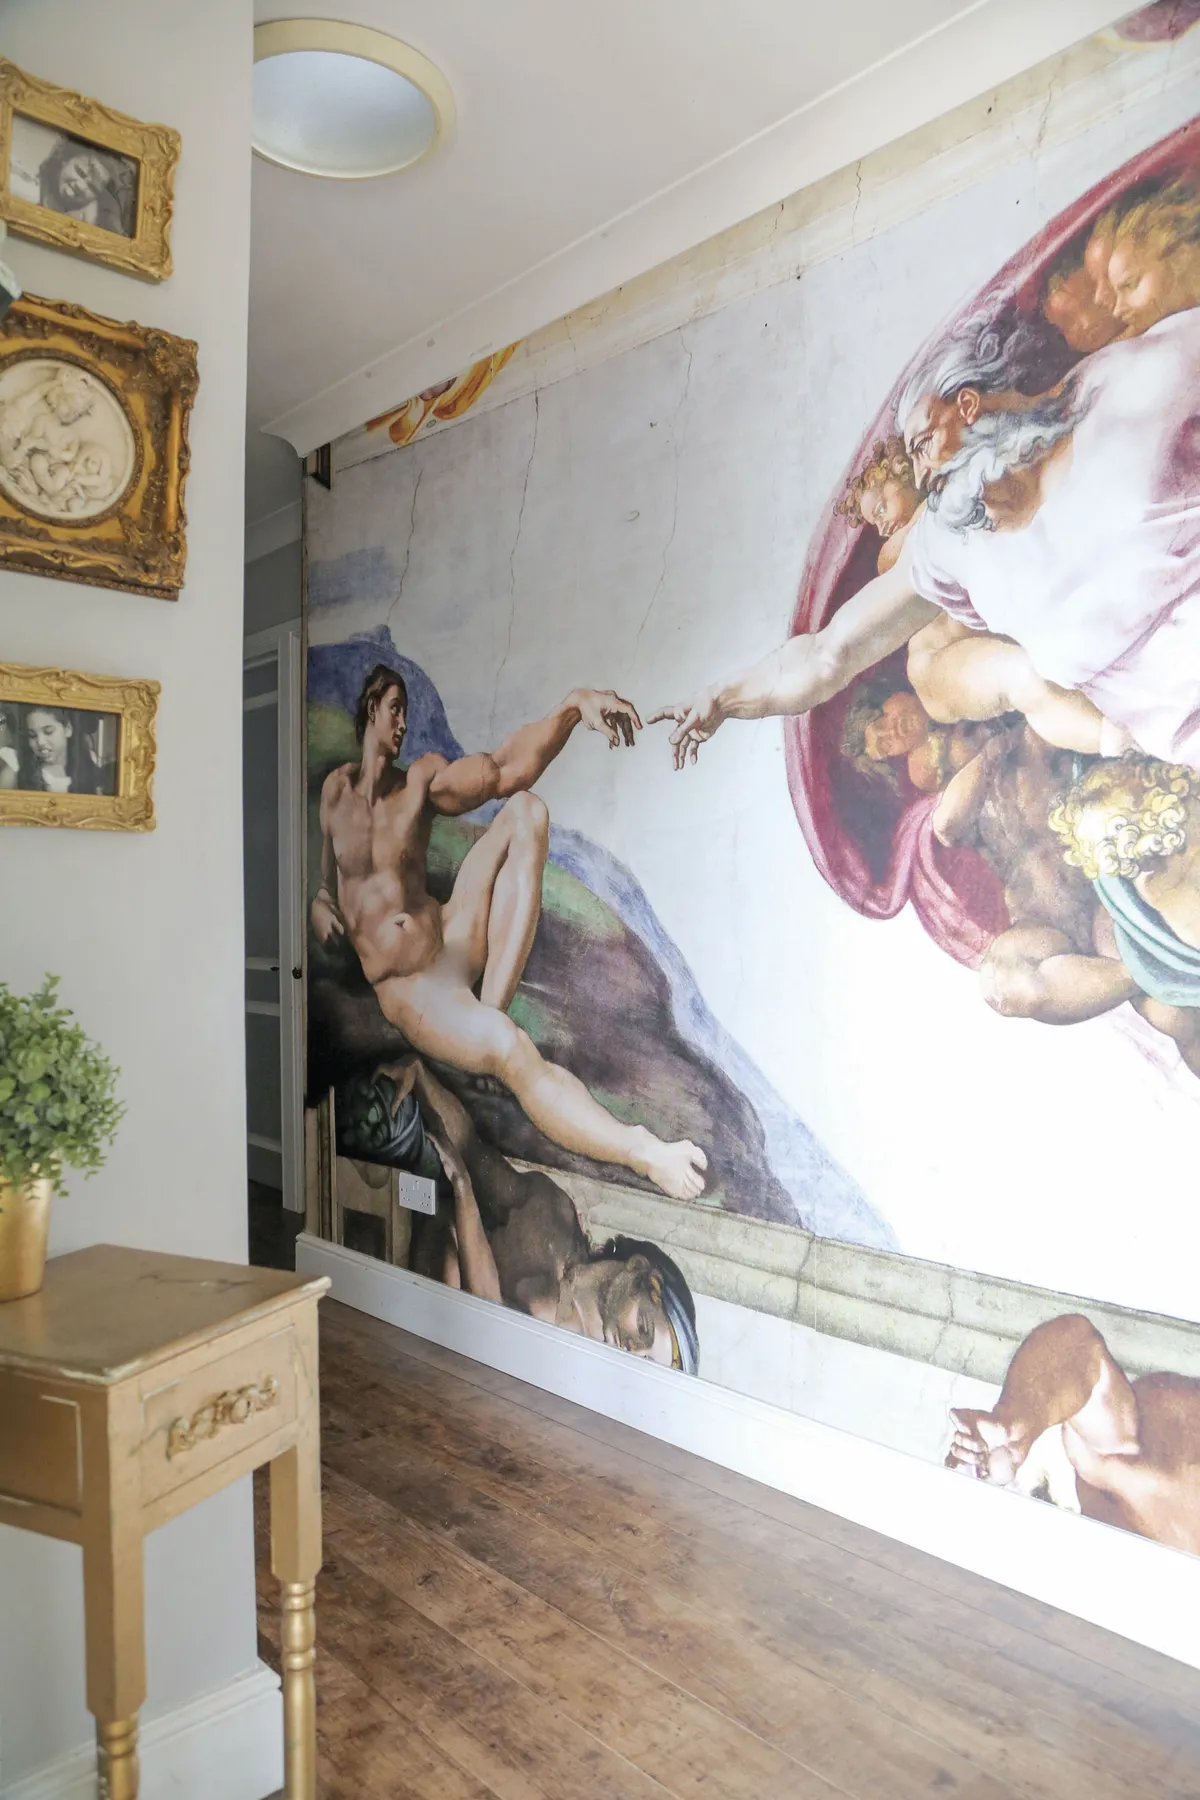 ‘I wanted the hallway to be an extension of the house and give guests a taste of my interior style the second they walk through the front door. I replaced the flooring with the same dark wood used throughout the house and painted the walls light grey. I hung an amazing mural depicting Michelangelo’s Sistine Chapel ceiling painting, and lots of framed photos of my family for a warm, friendly welcome’